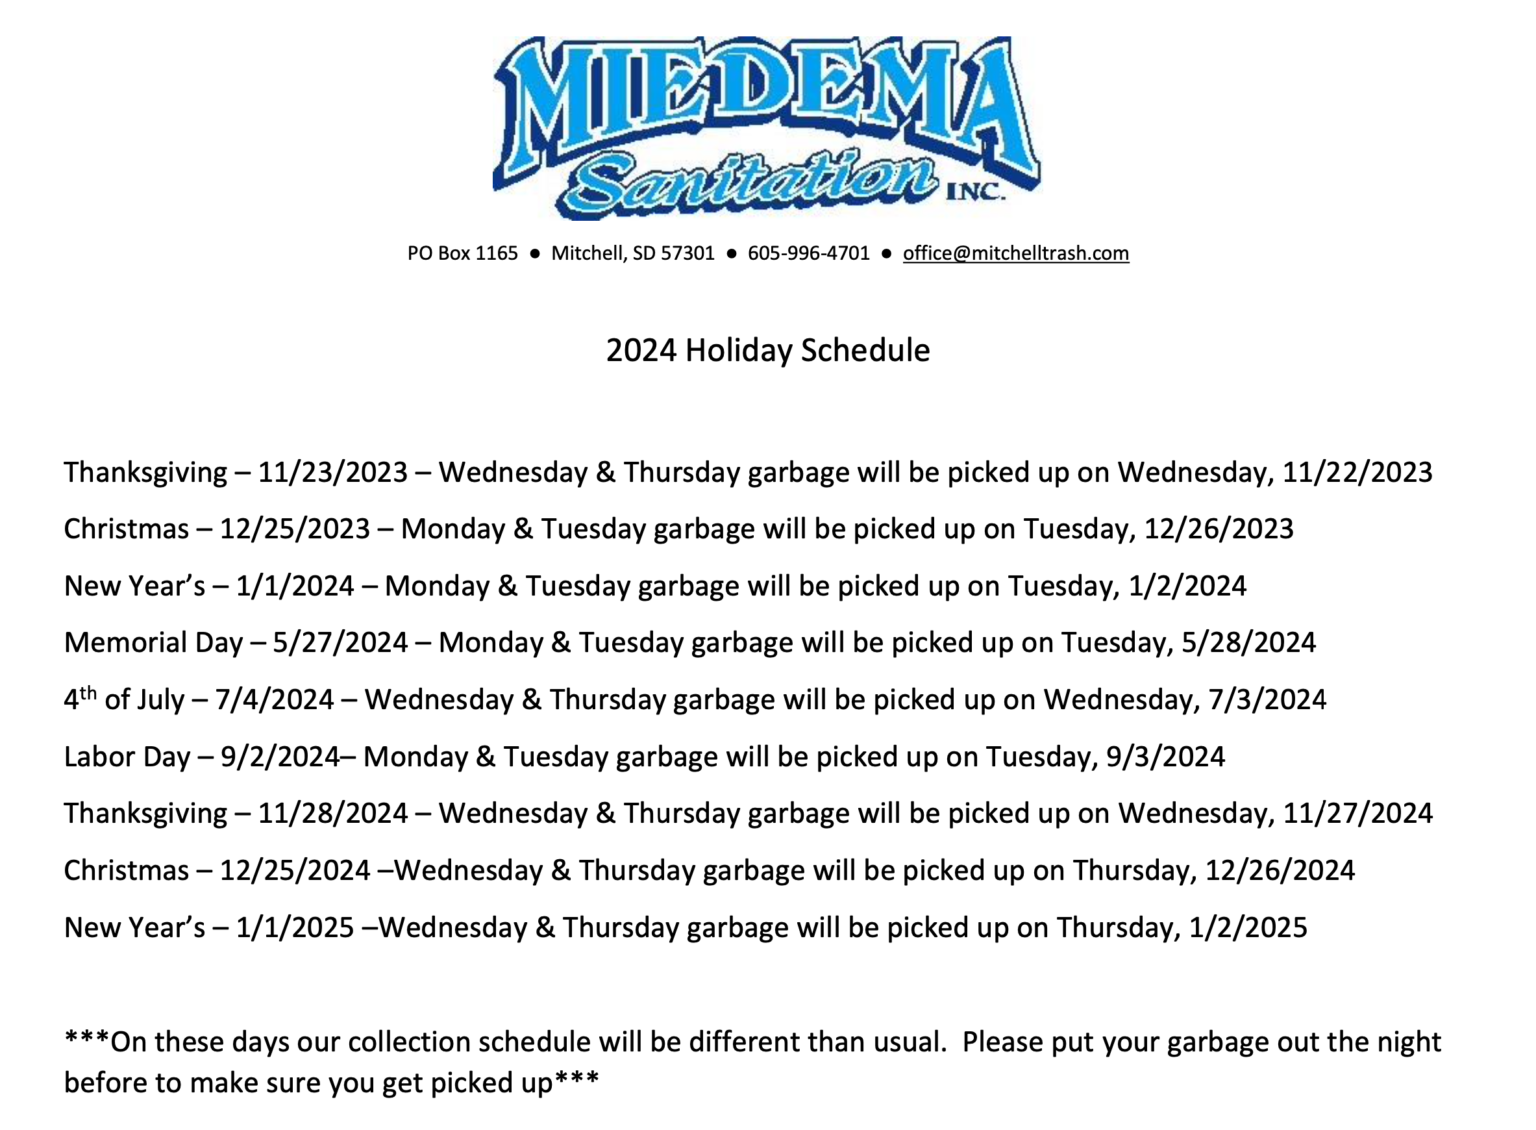 Please call if you have trouble reading the holiday collection schedule